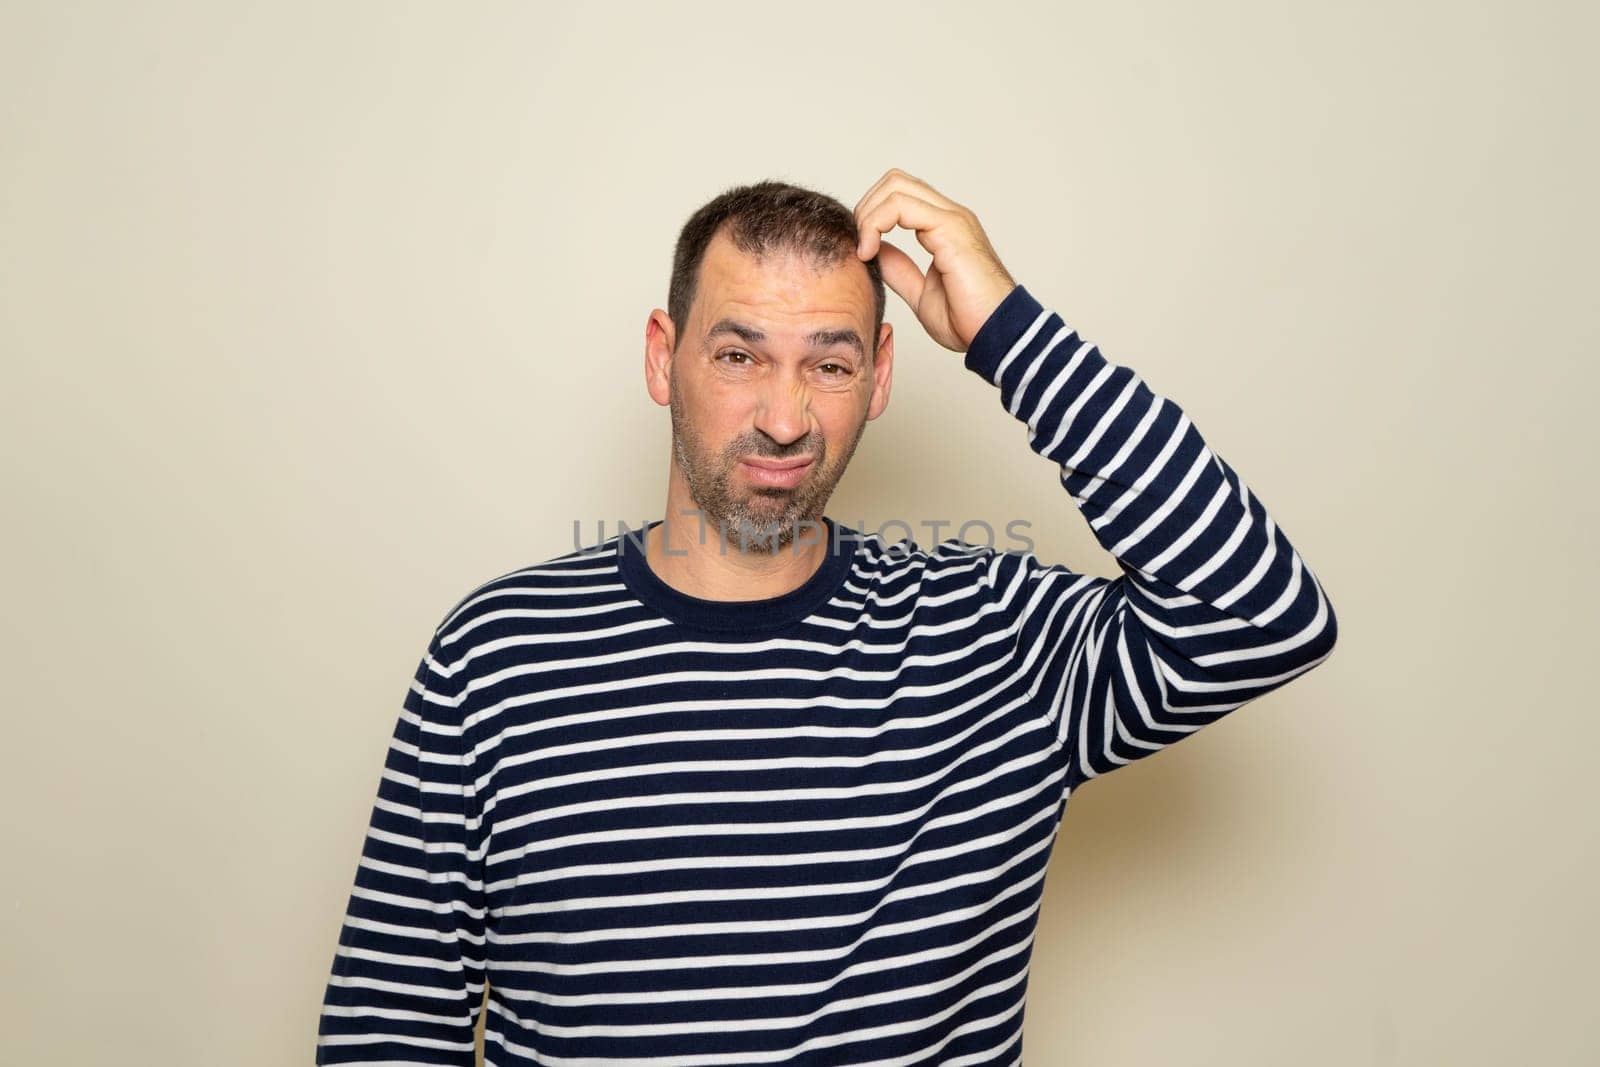 Bearded Hispanic man in his 40s wearing a striped sweater scratching his head while trying to make a decision, doubt concept. Isolated on beige studio background. by Barriolo82